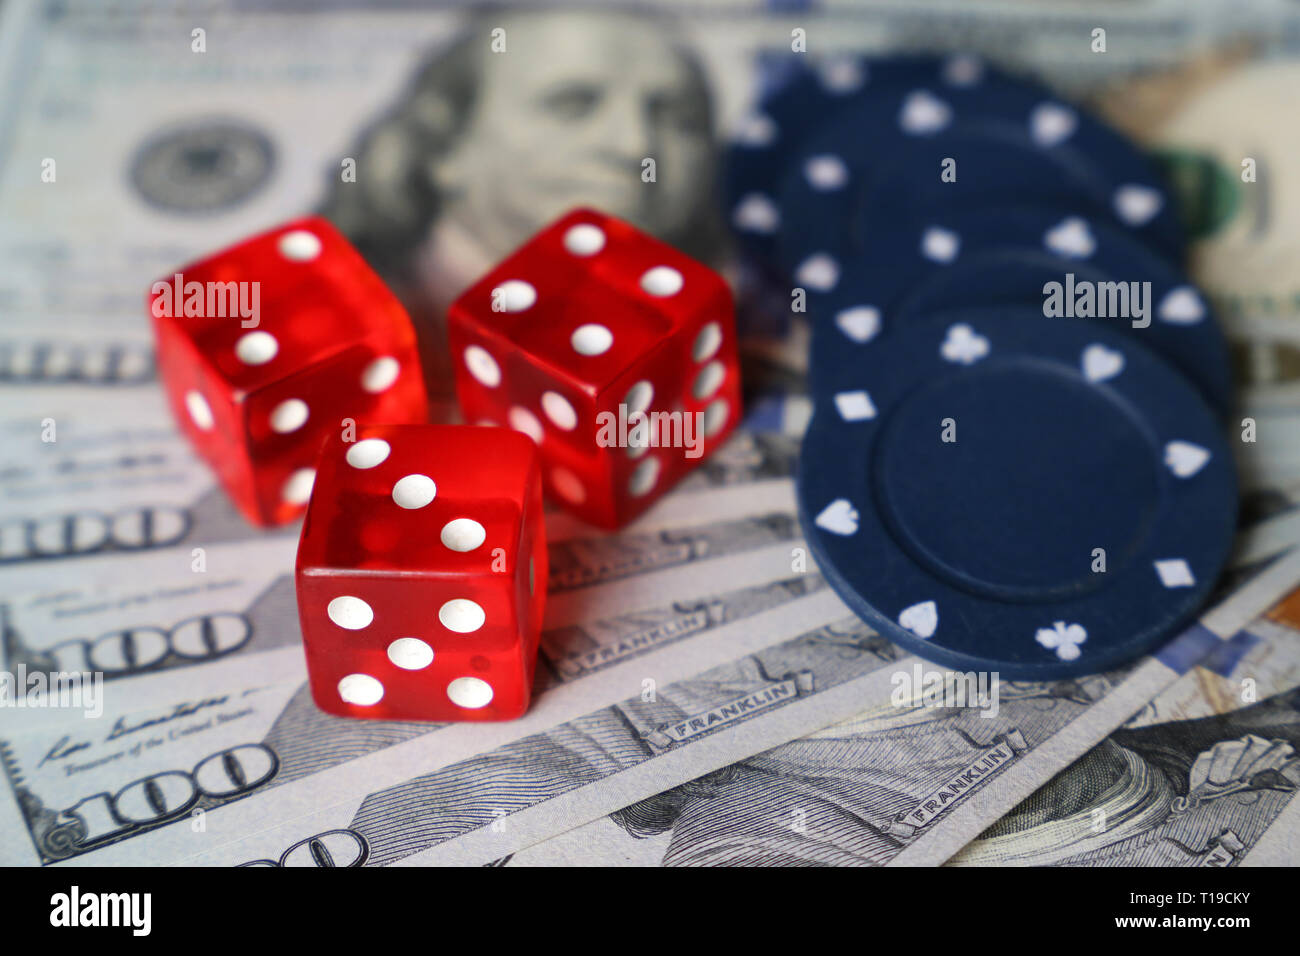 Red dice and casino gaming chips on US dollars bills. Concept of casino games, winning, gambling, luck or randomness Stock Photo